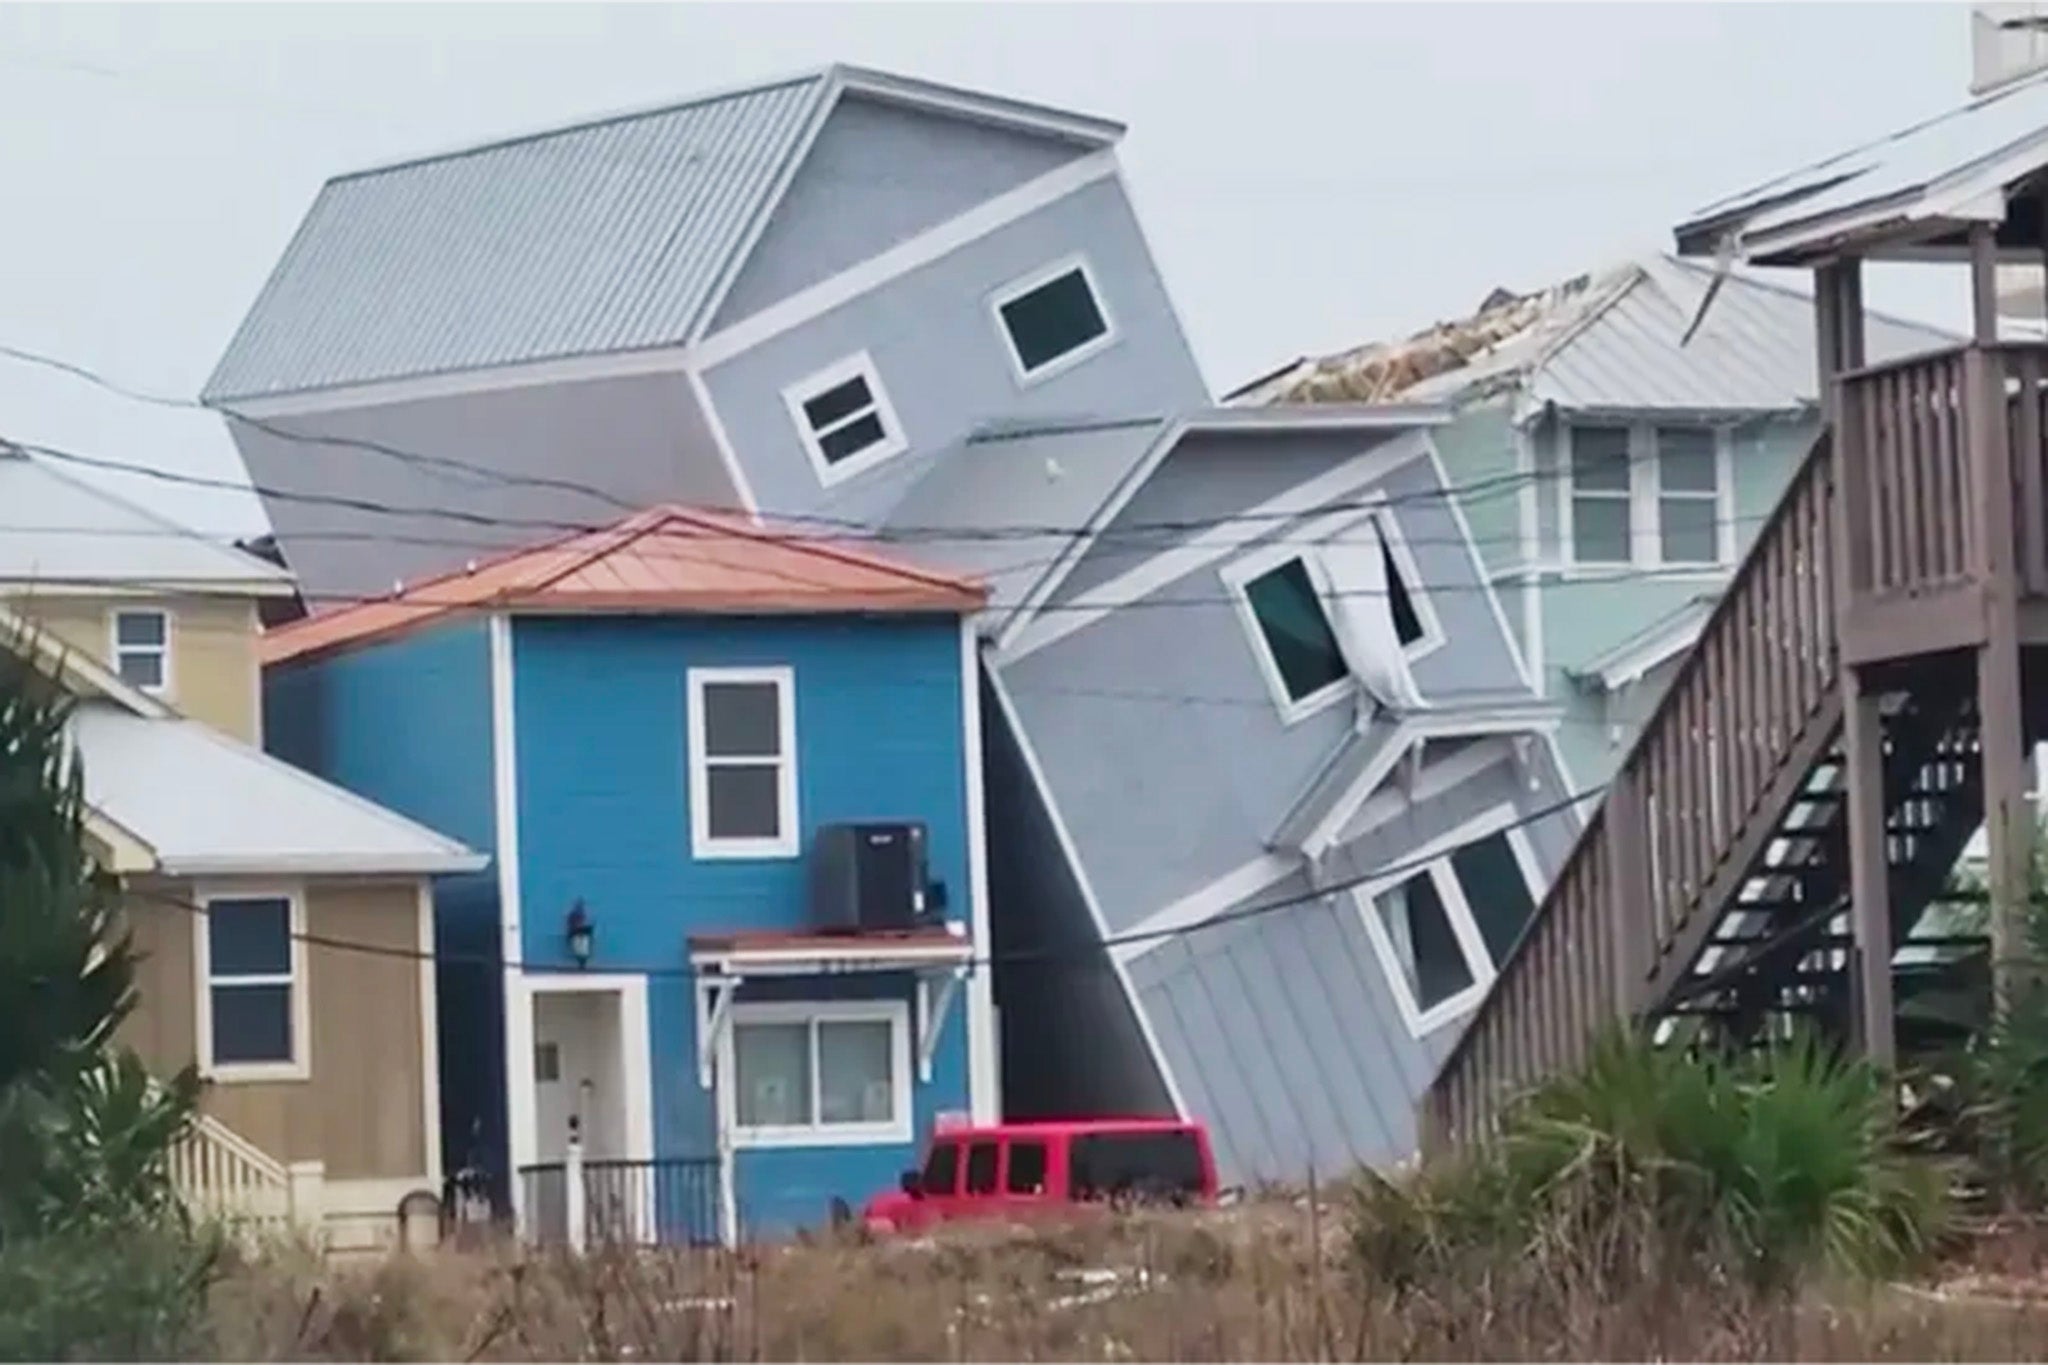 Damage to houses in Panama City Beach, Florida after a storm